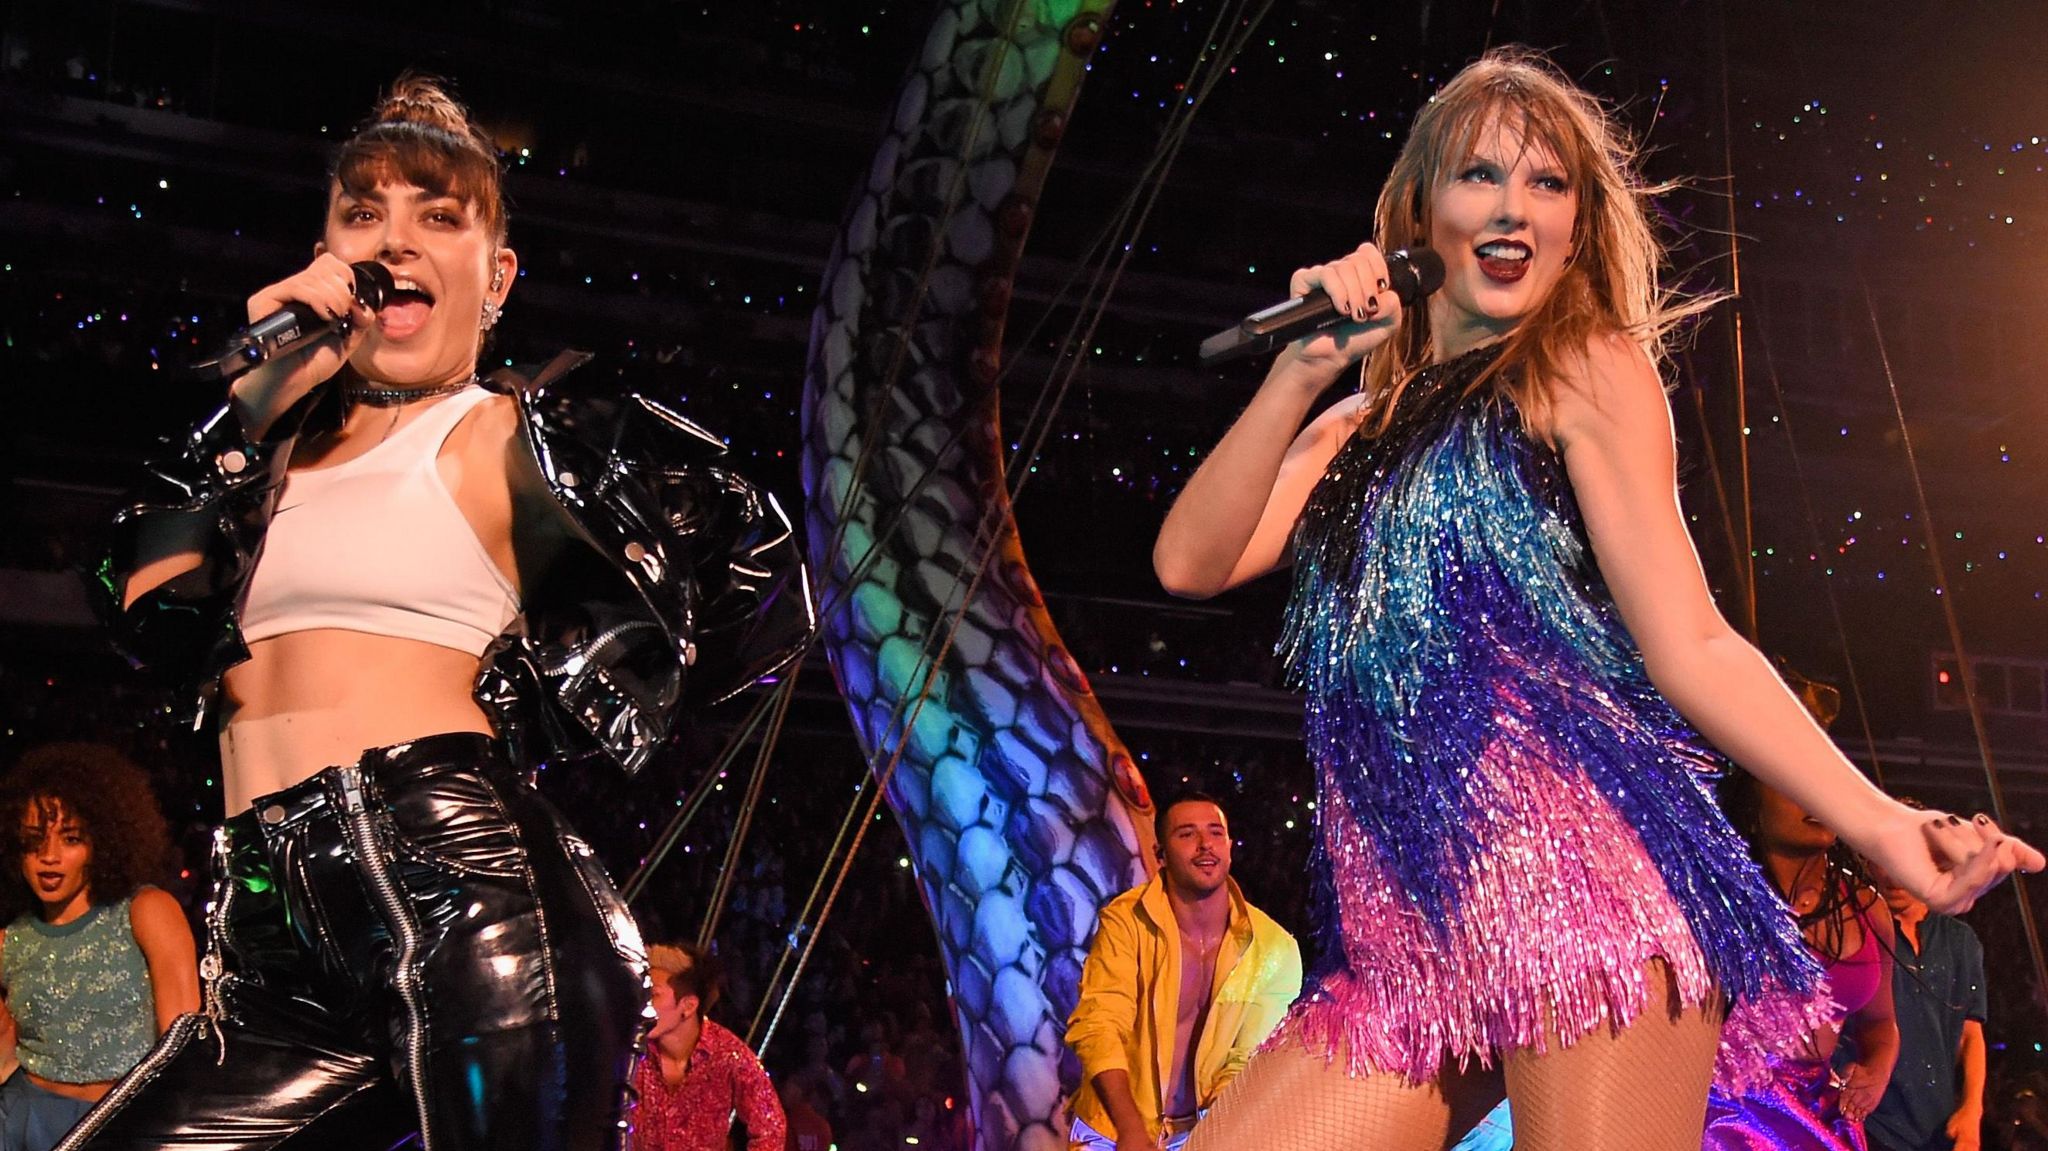 Charli XCX and Taylor Swift on stage together as part of Taylor's Reputation tour in 2018. Charli wears her dark hair in a top knot and wears a white crop top paired with a patent black jacket and matching trousers. Taylor wears a sparkly mini dress in pink, blue, purple and black. She has long blonde hair and red lipstick. 